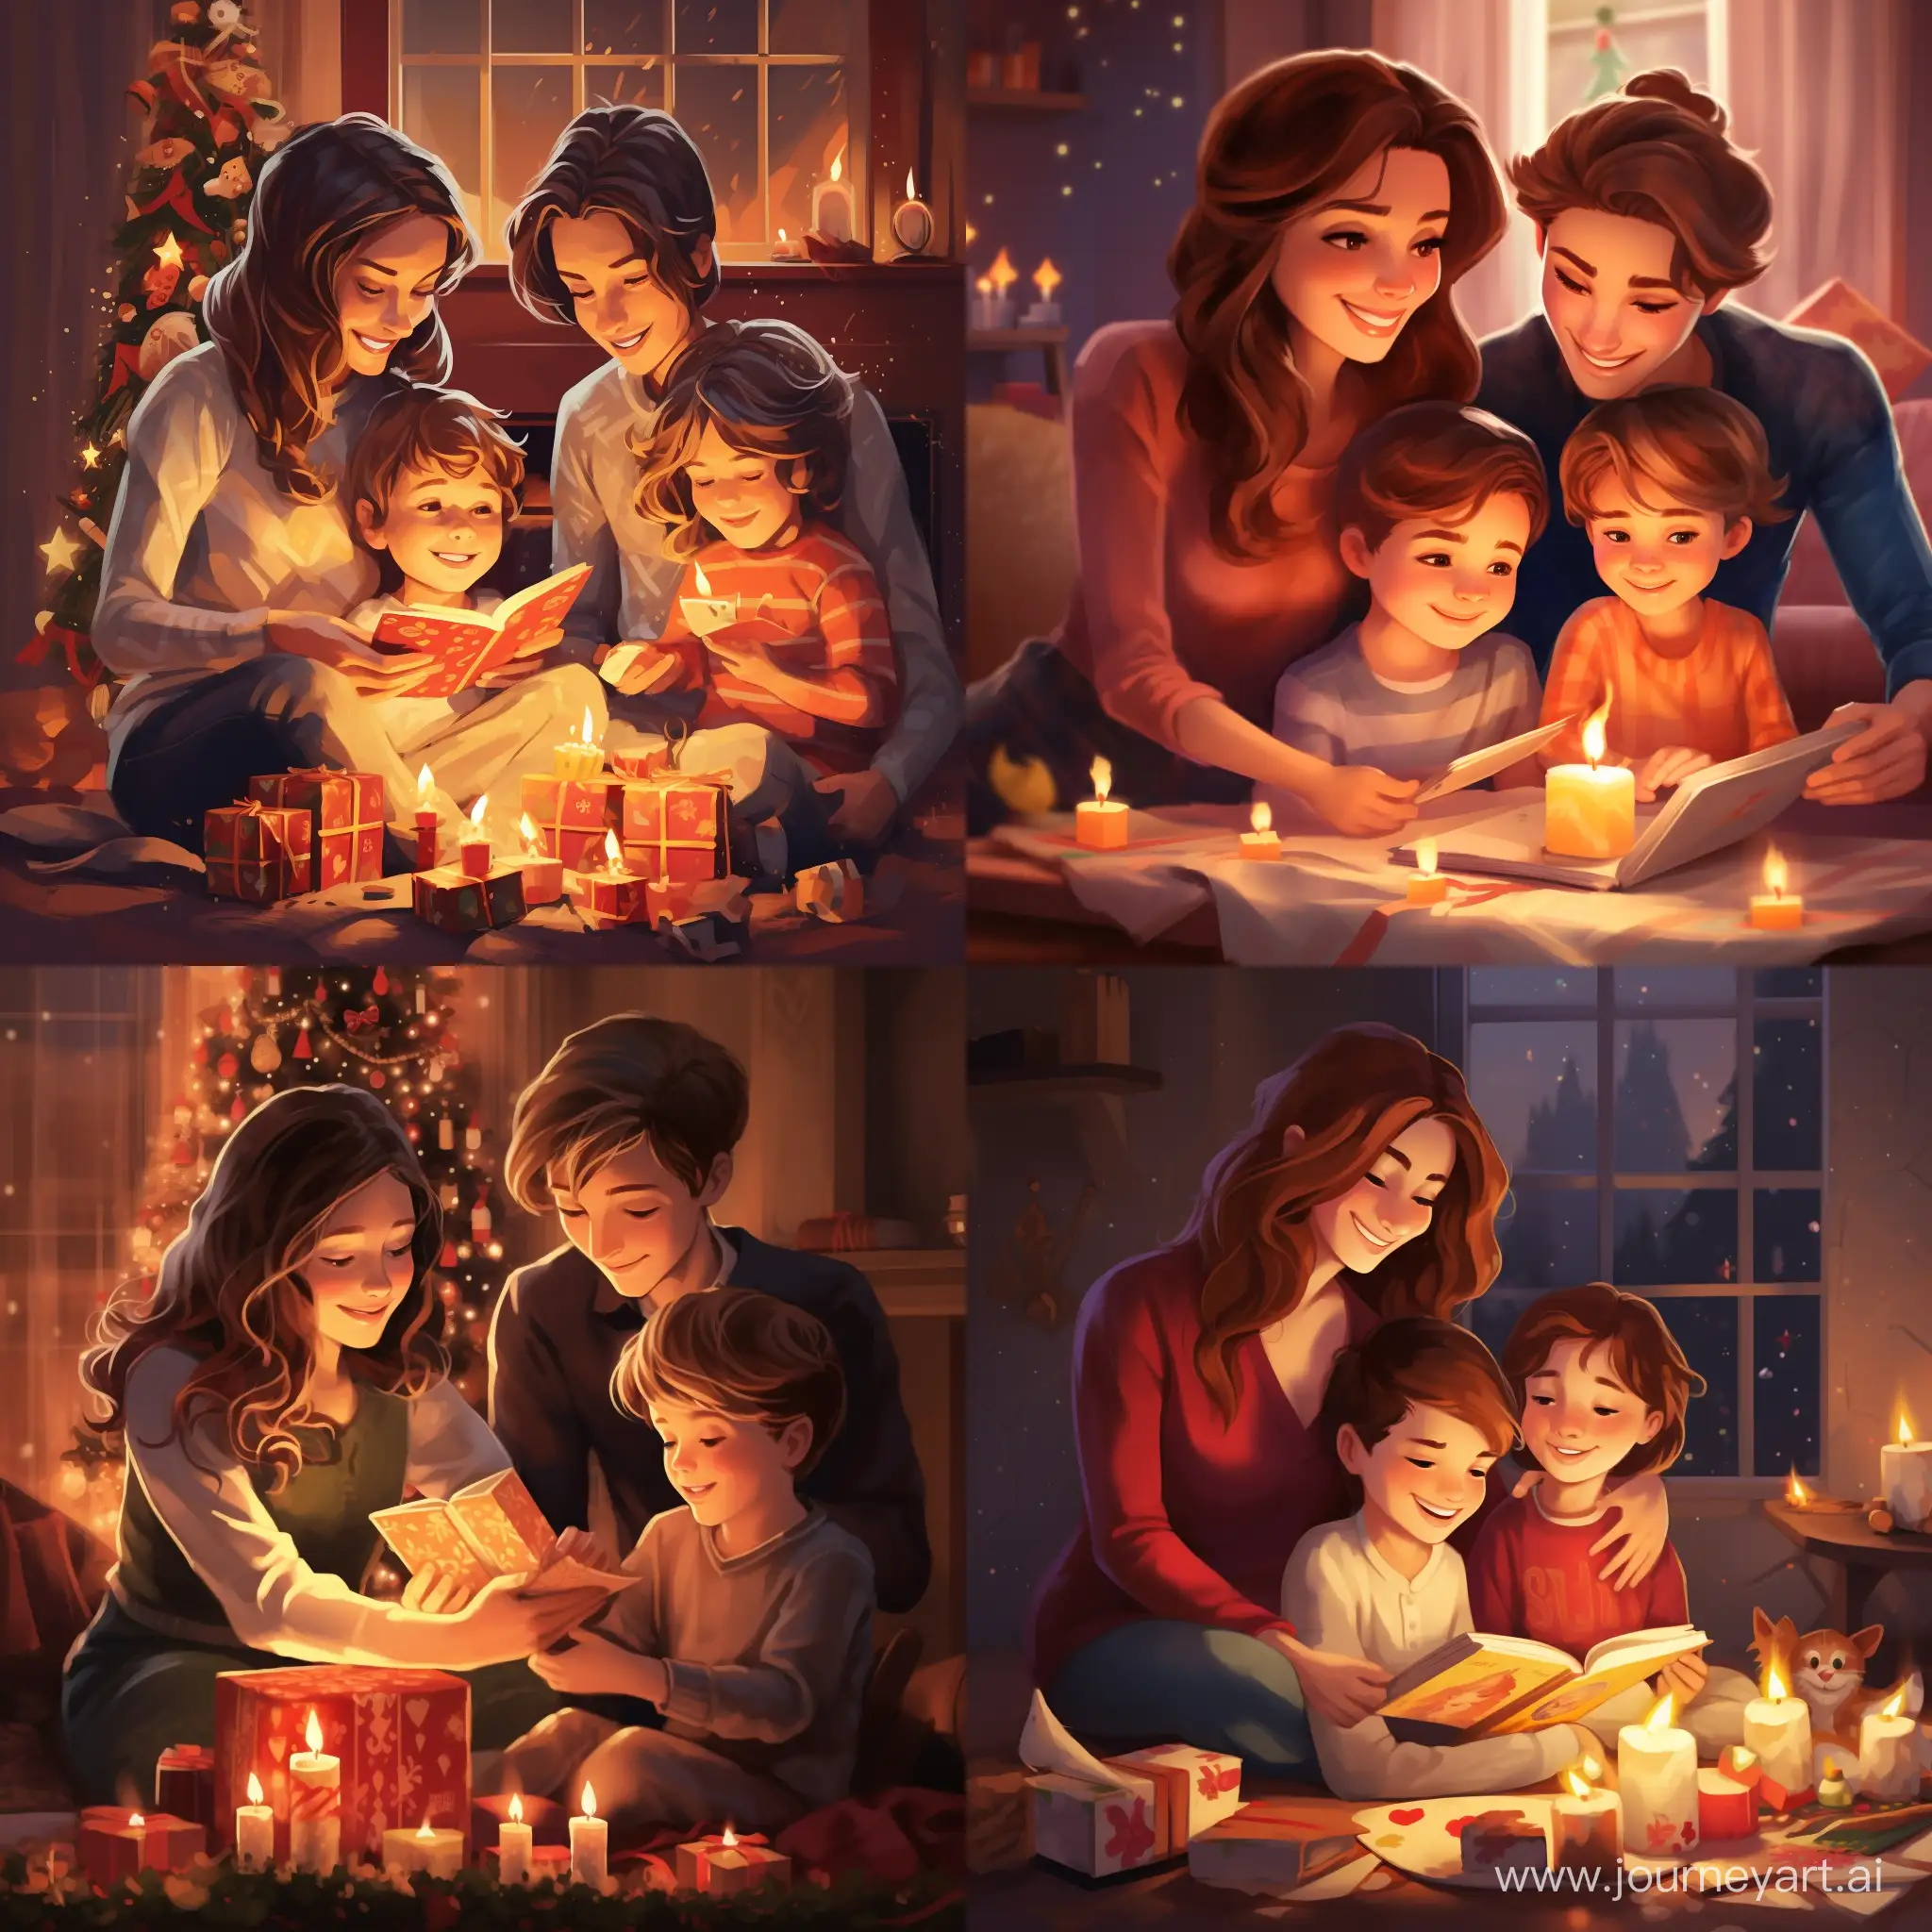 Festive-Family-Unwrapping-Christmas-Gifts-in-Animated-Joy